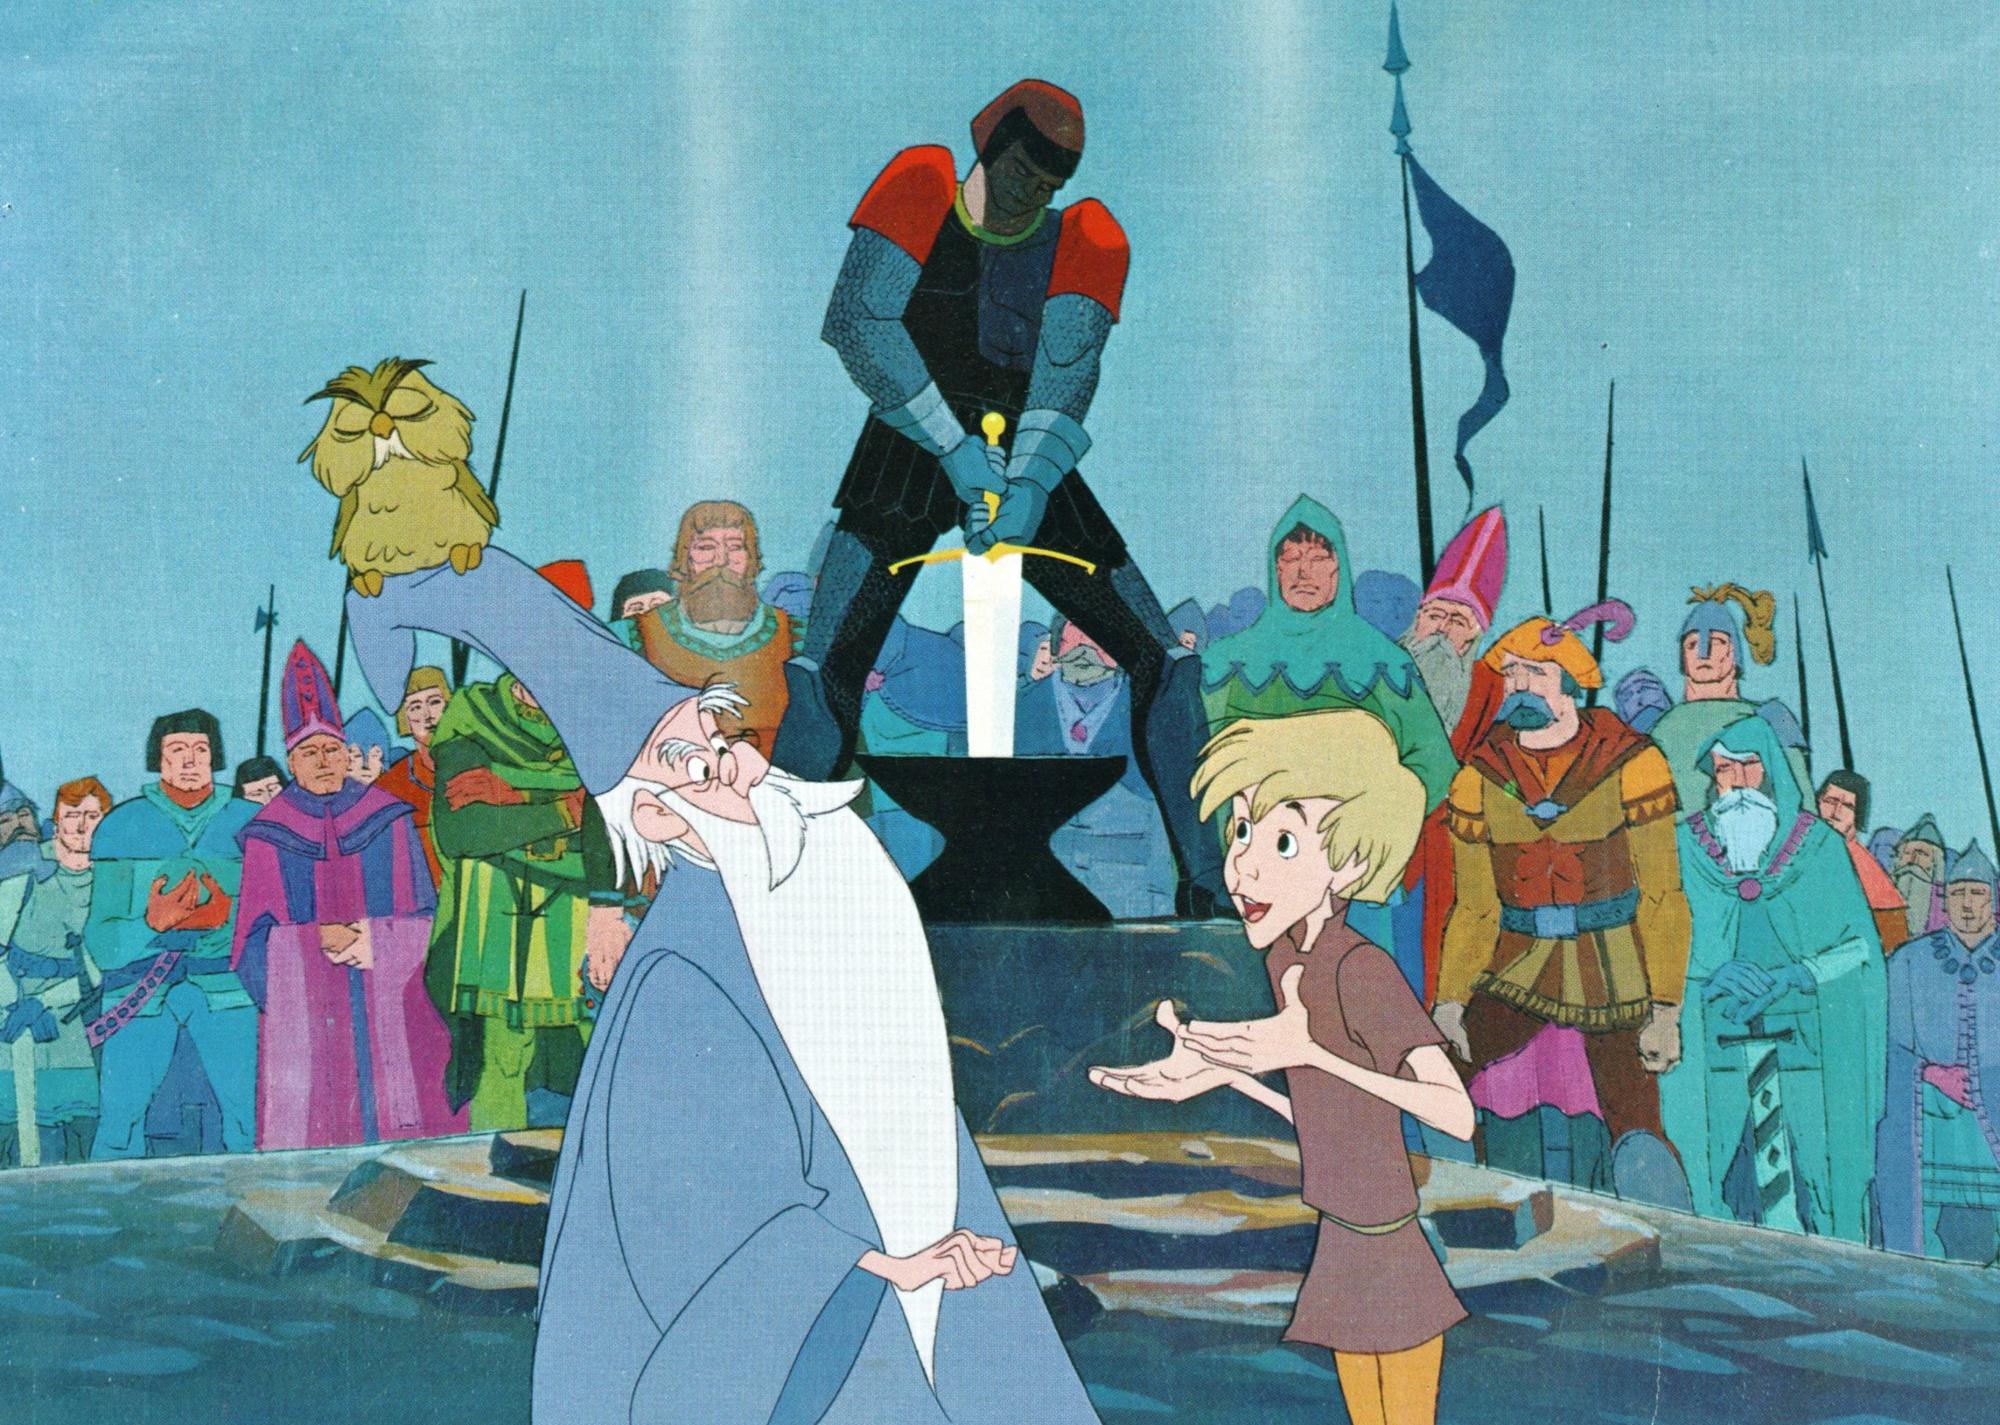 A cartoon of a boy talking to a wizard in front of a man with a sword and a big crowd.